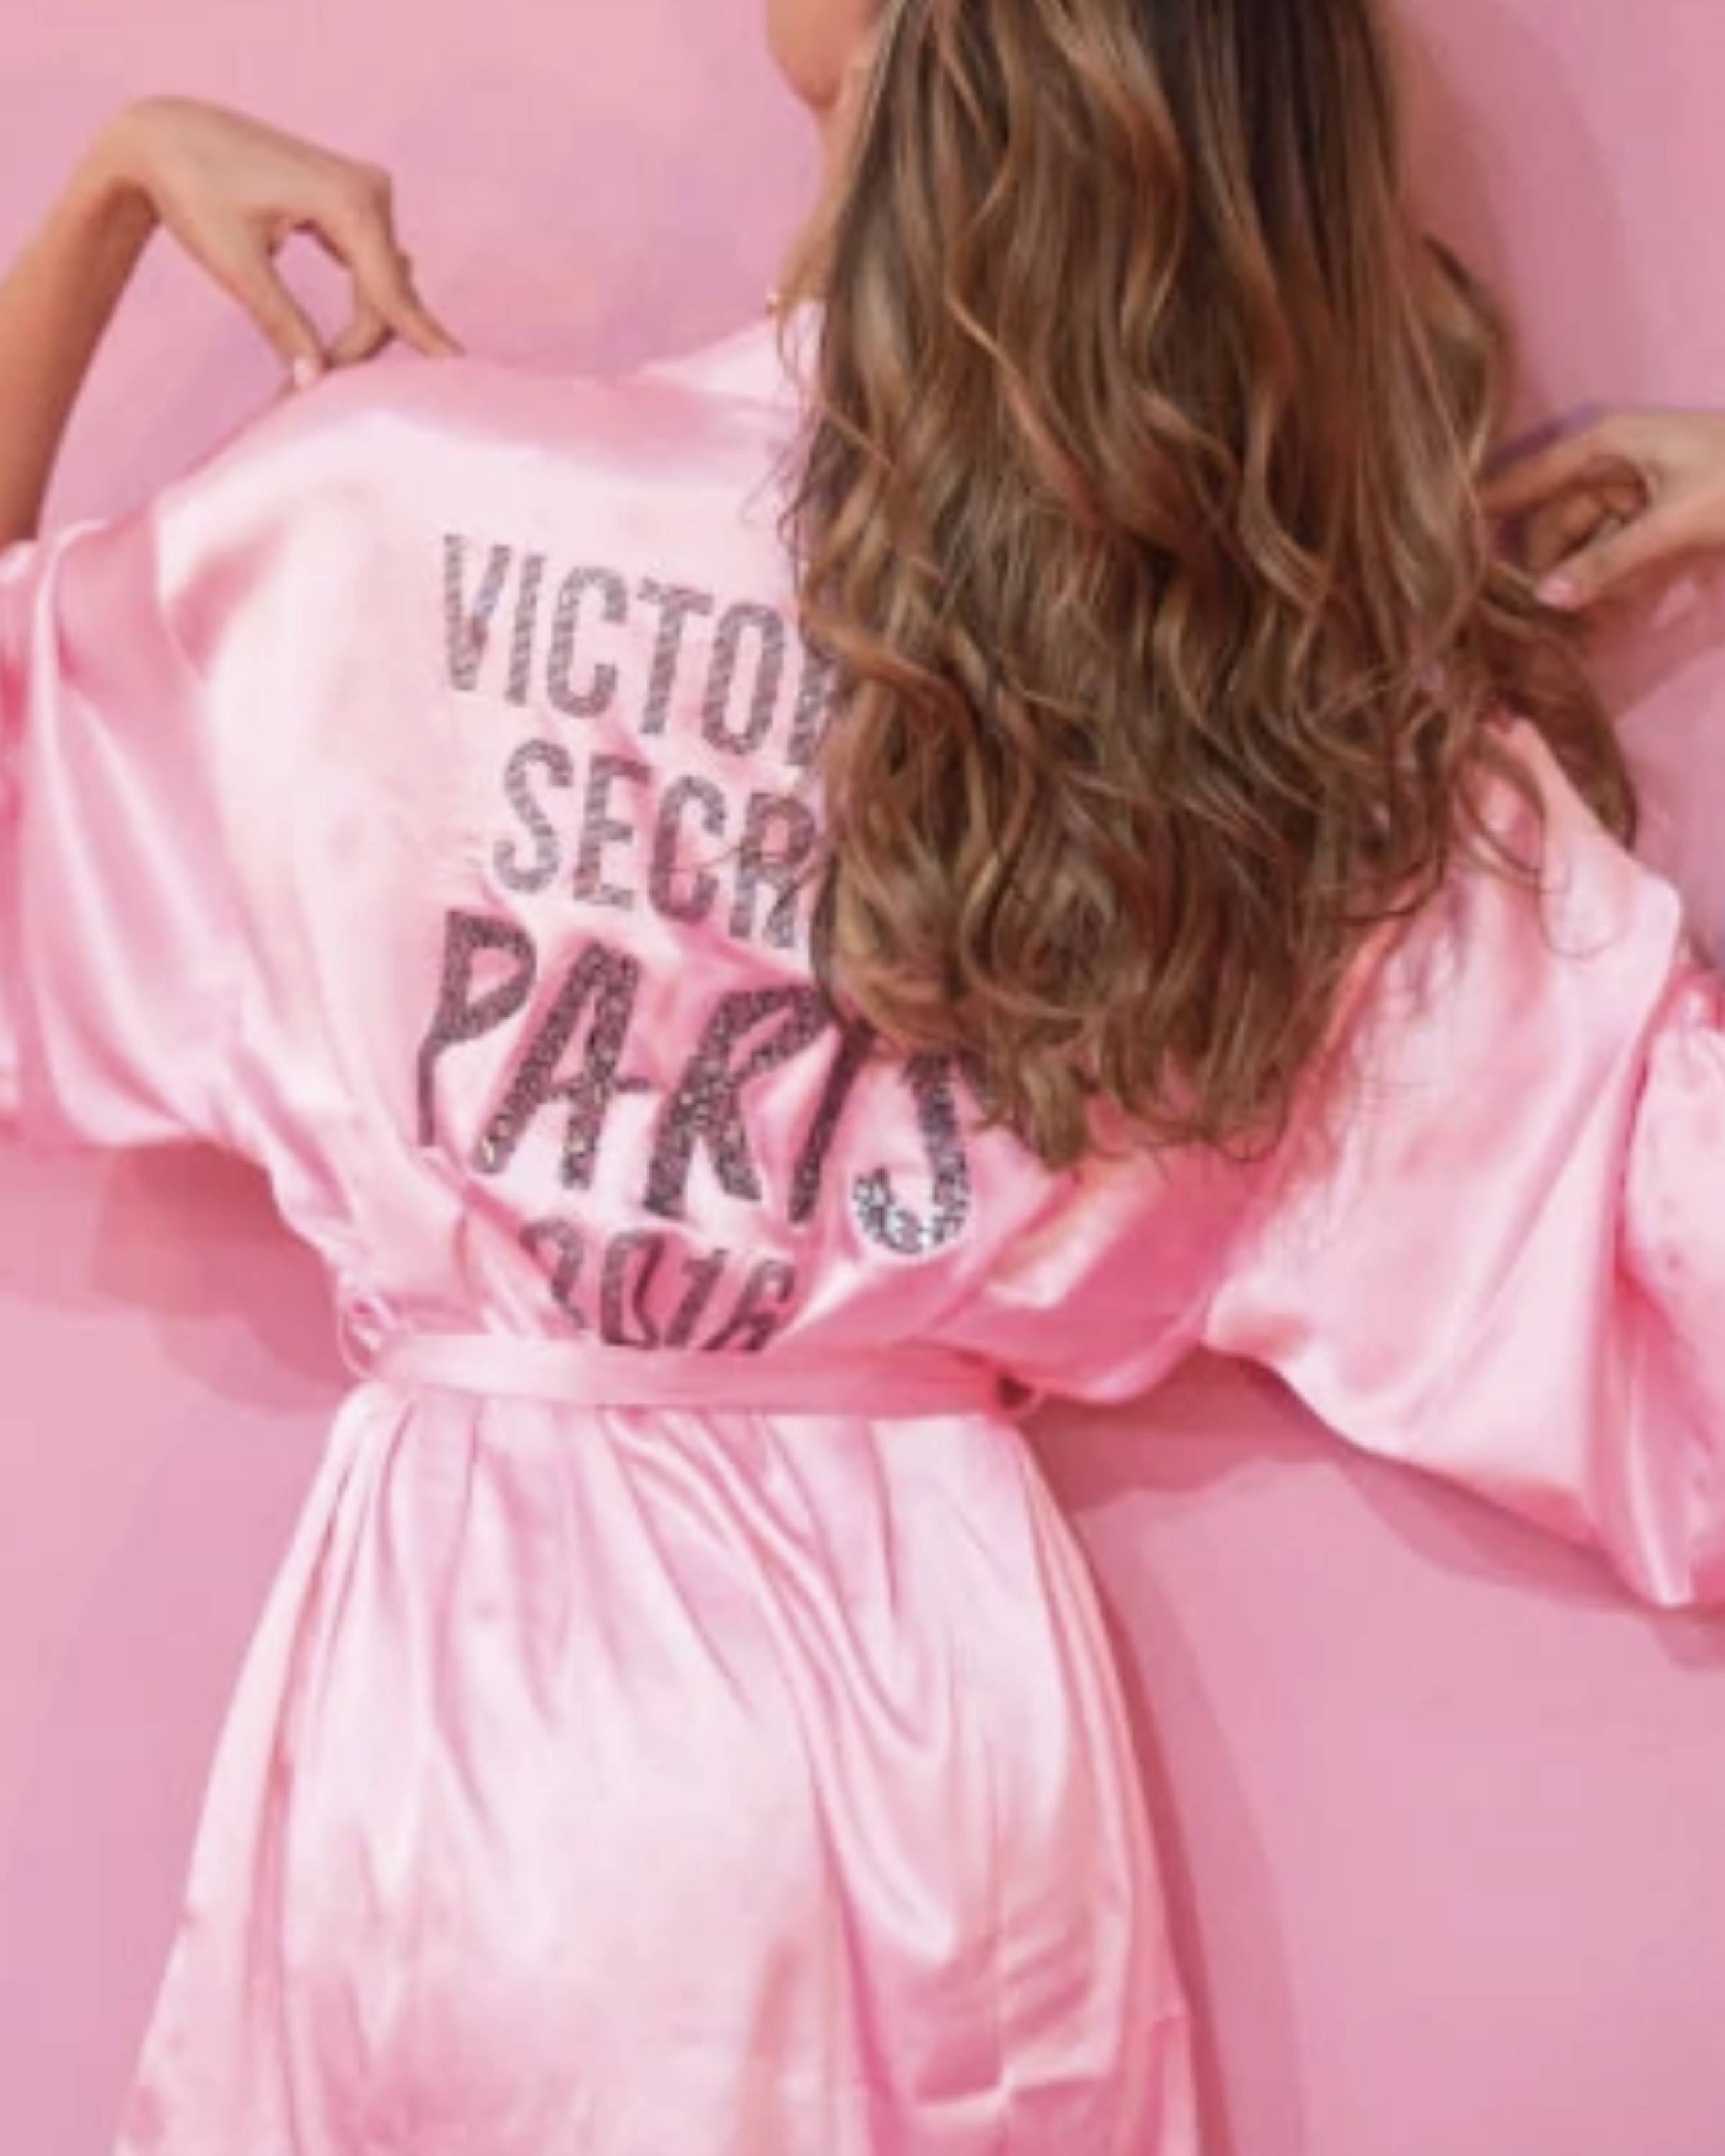 image of Victoria Secret Angel with her back to the camera showing off her pink Victoria Secret PARIS 2016